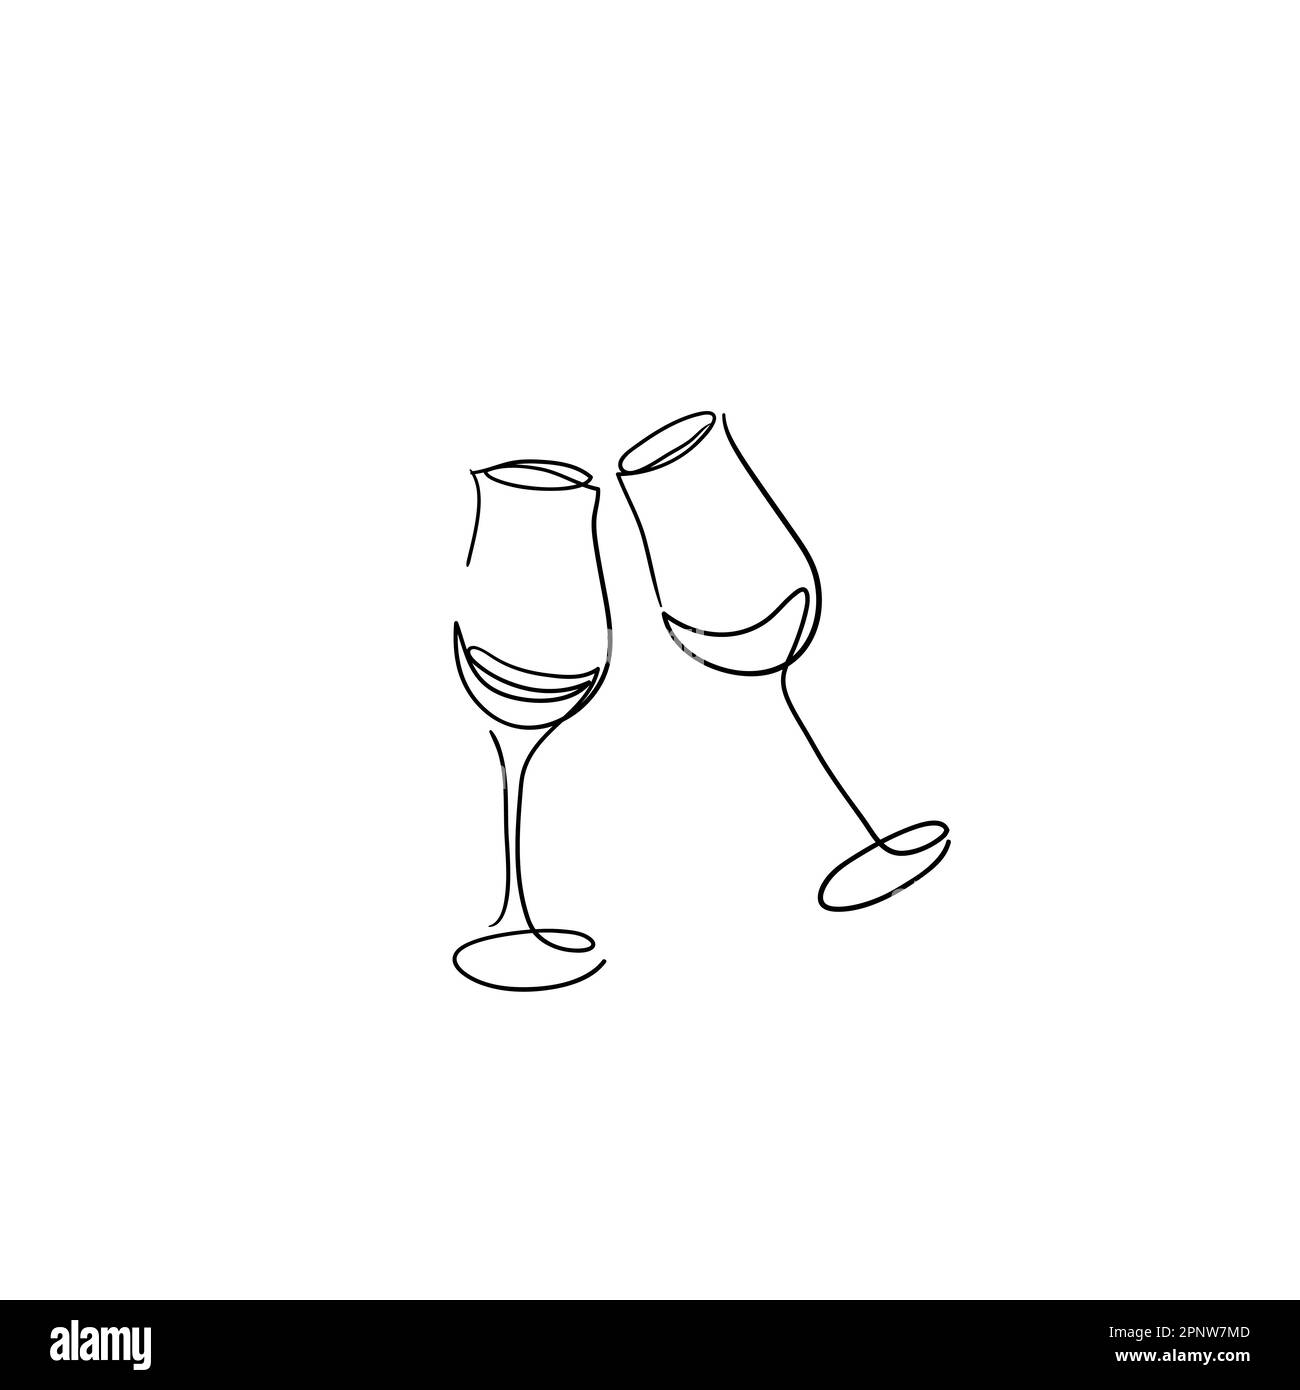 Pink Champagne Glass drawing free image download